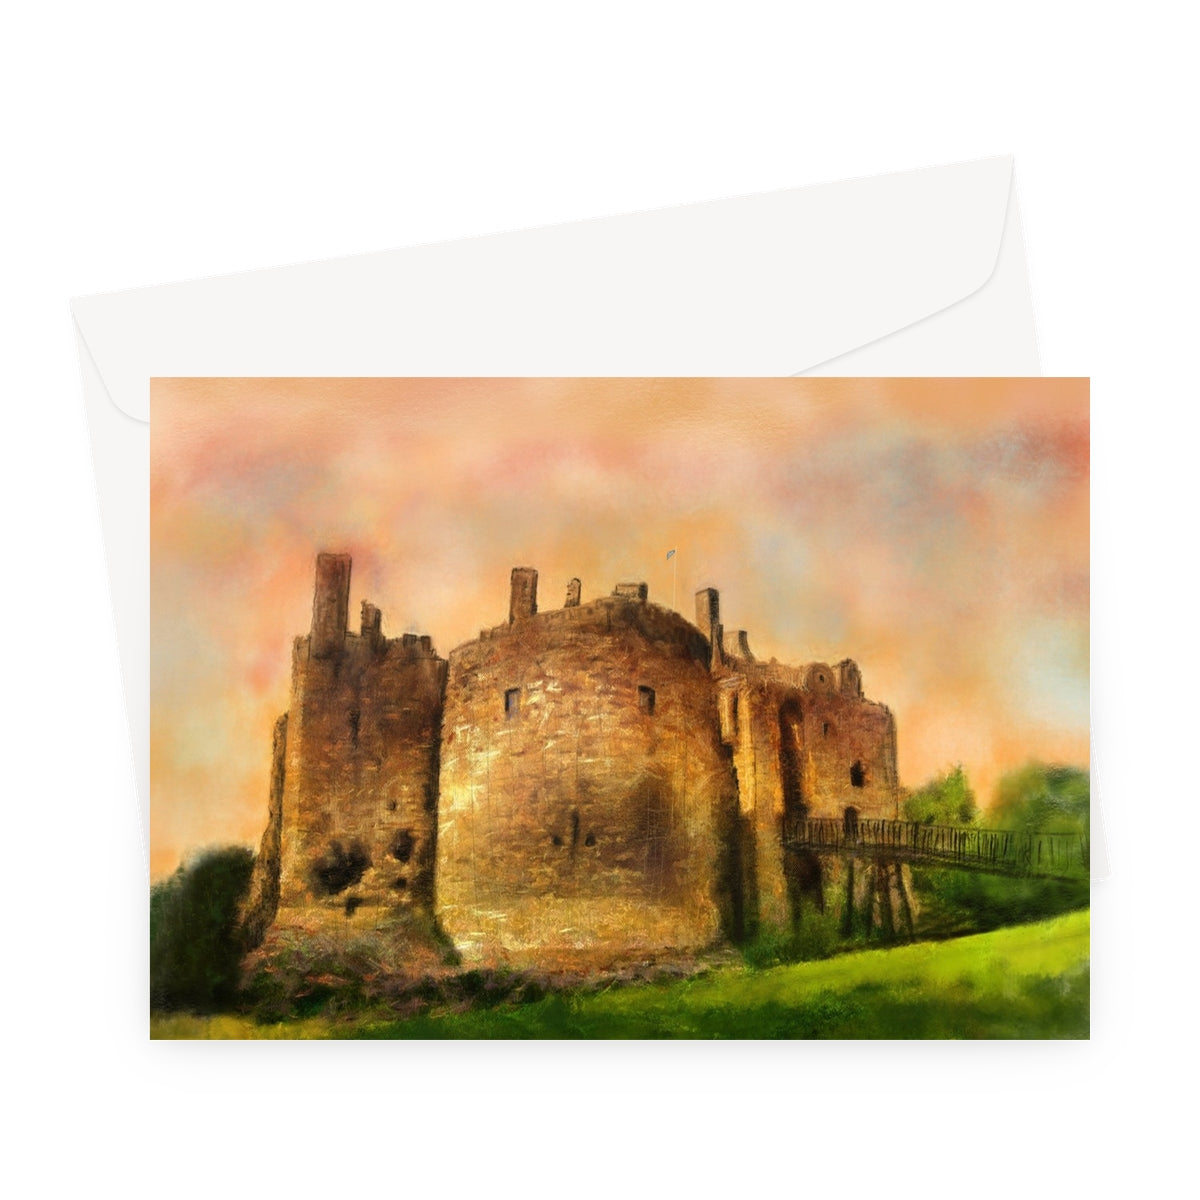 Dirleton Castle Art Gifts Greeting Card-Greetings Cards-Historic & Iconic Scotland Art Gallery-A5 Landscape-1 Card-Paintings, Prints, Homeware, Art Gifts From Scotland By Scottish Artist Kevin Hunter